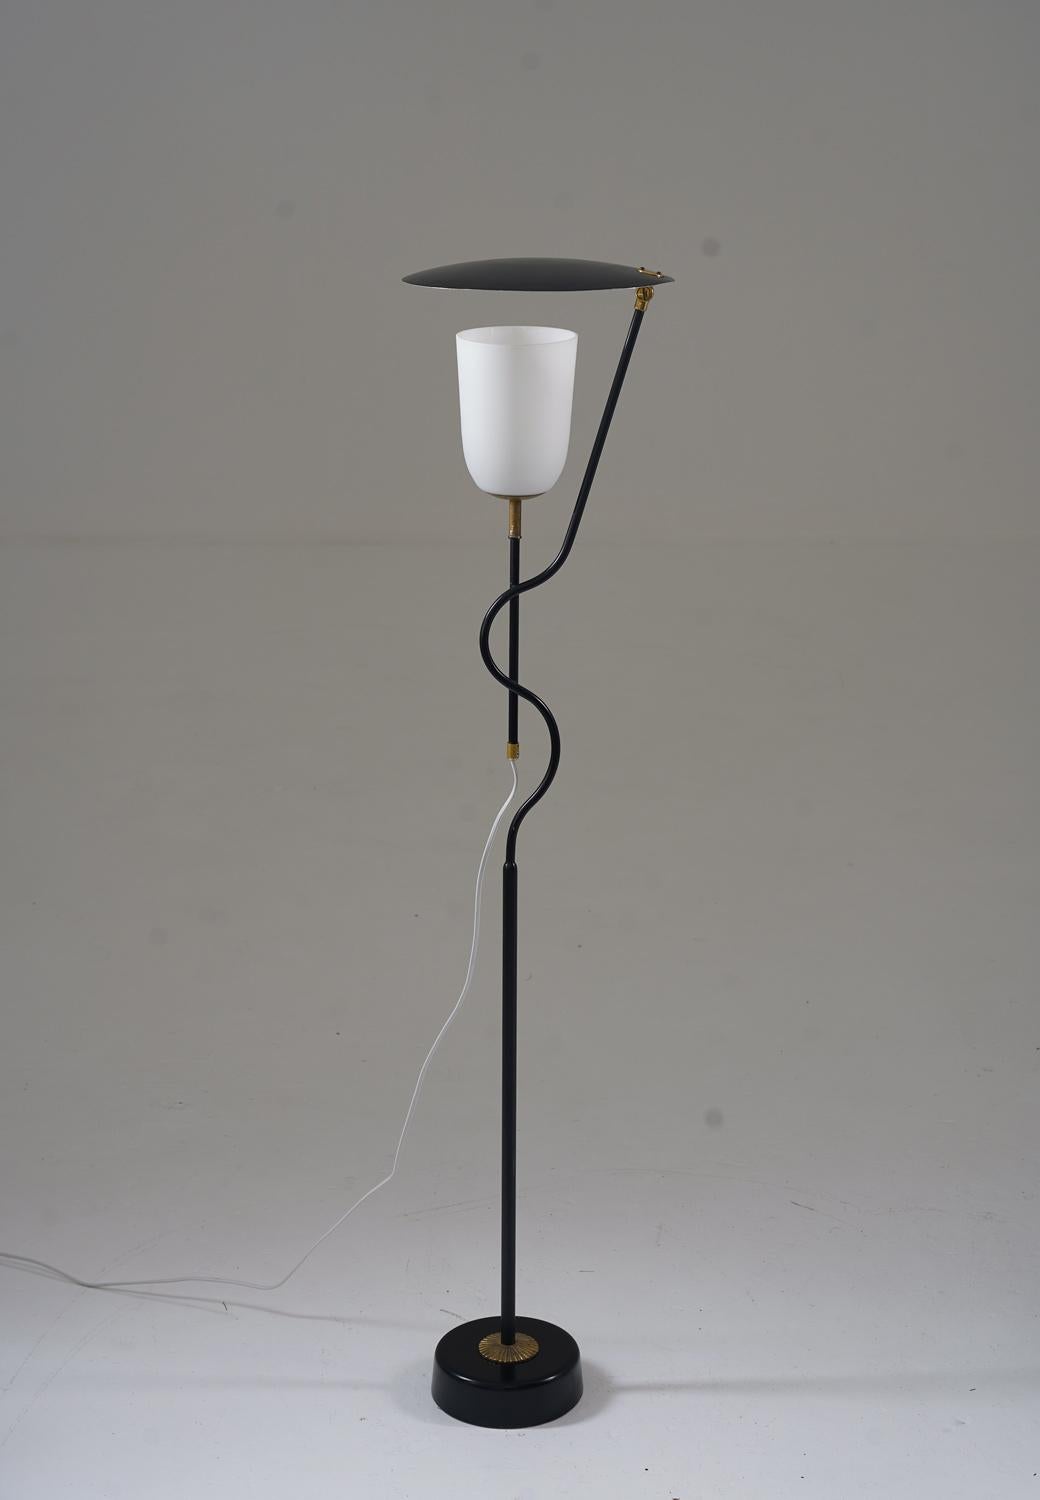 Rare and spectacular uplight floor lamp by unknown Swedish manufacturer.
This petite lamp features one light source, hidden by an opaline glass shade with a metal reflector above, to adjust the light. 

Condition: Good vintage condition, the